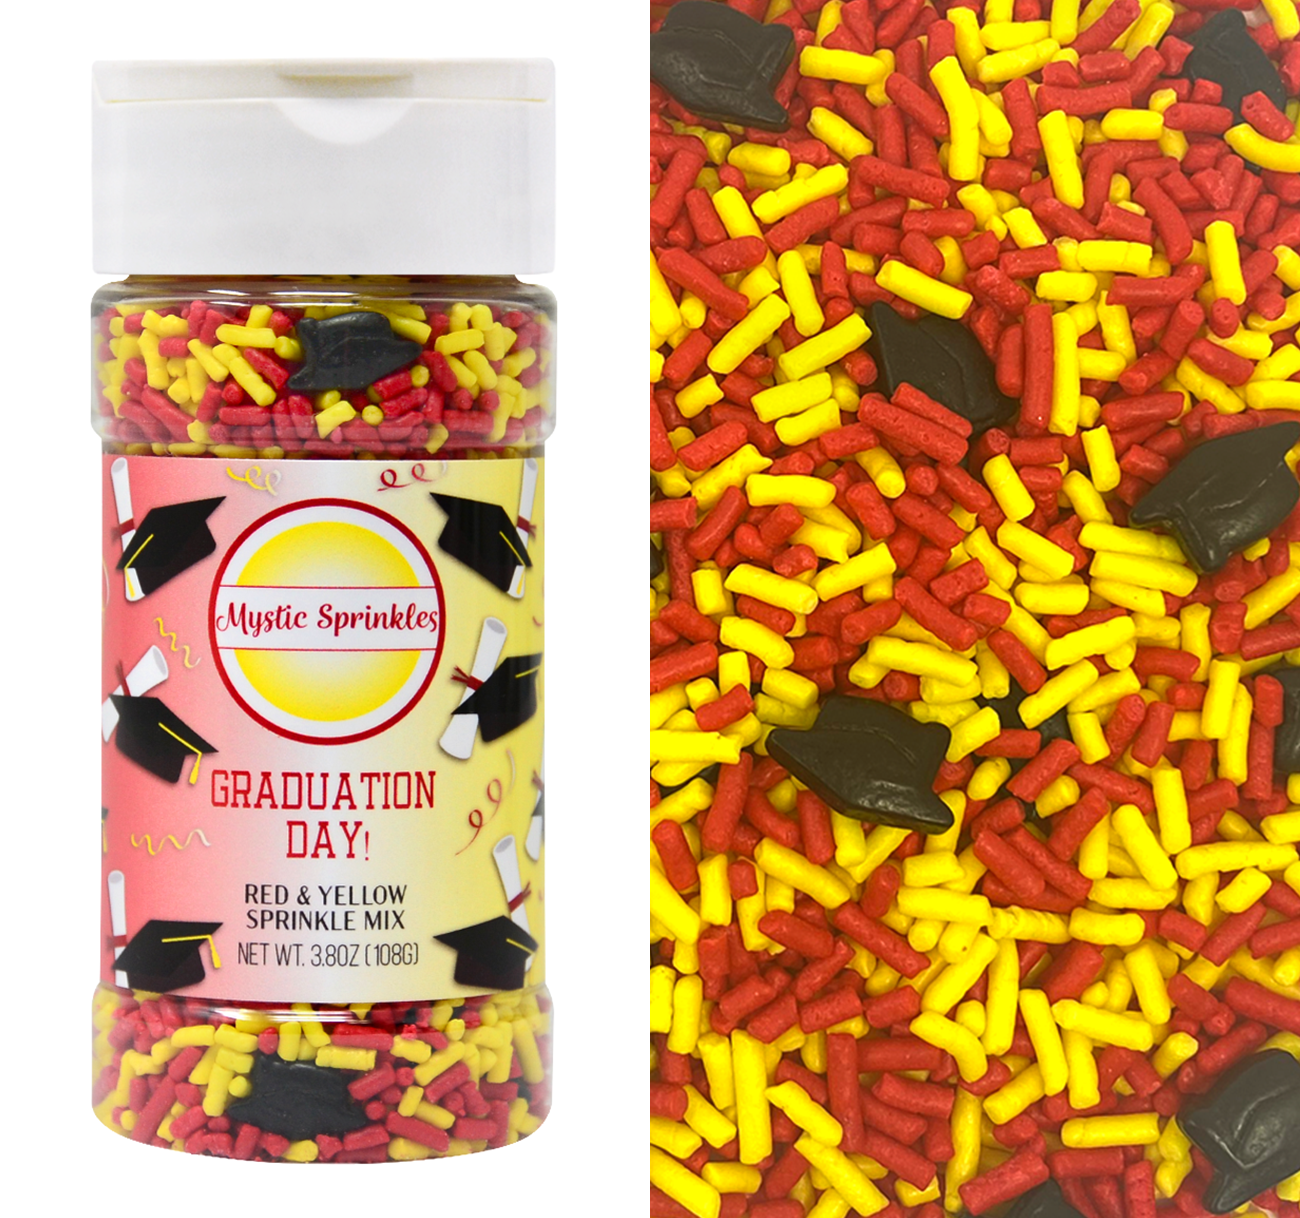 Graduation Day! Red & Yellow Sprinkle Mix 3.8oz